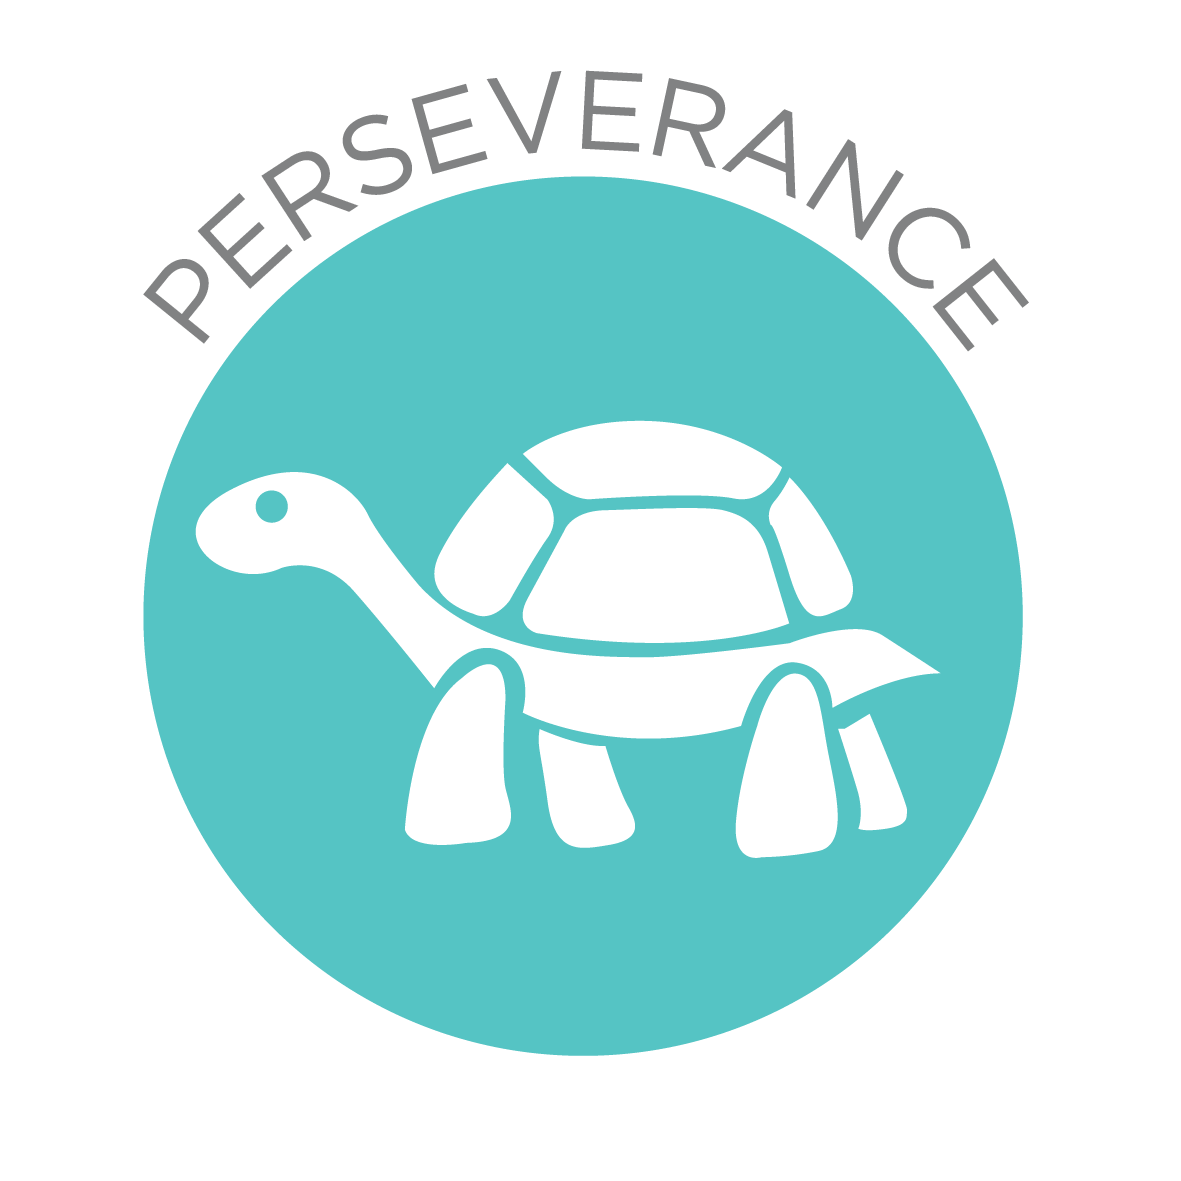 Cartoon image of a white tortoise on a blue circular background with the text 'perseverance' above it.